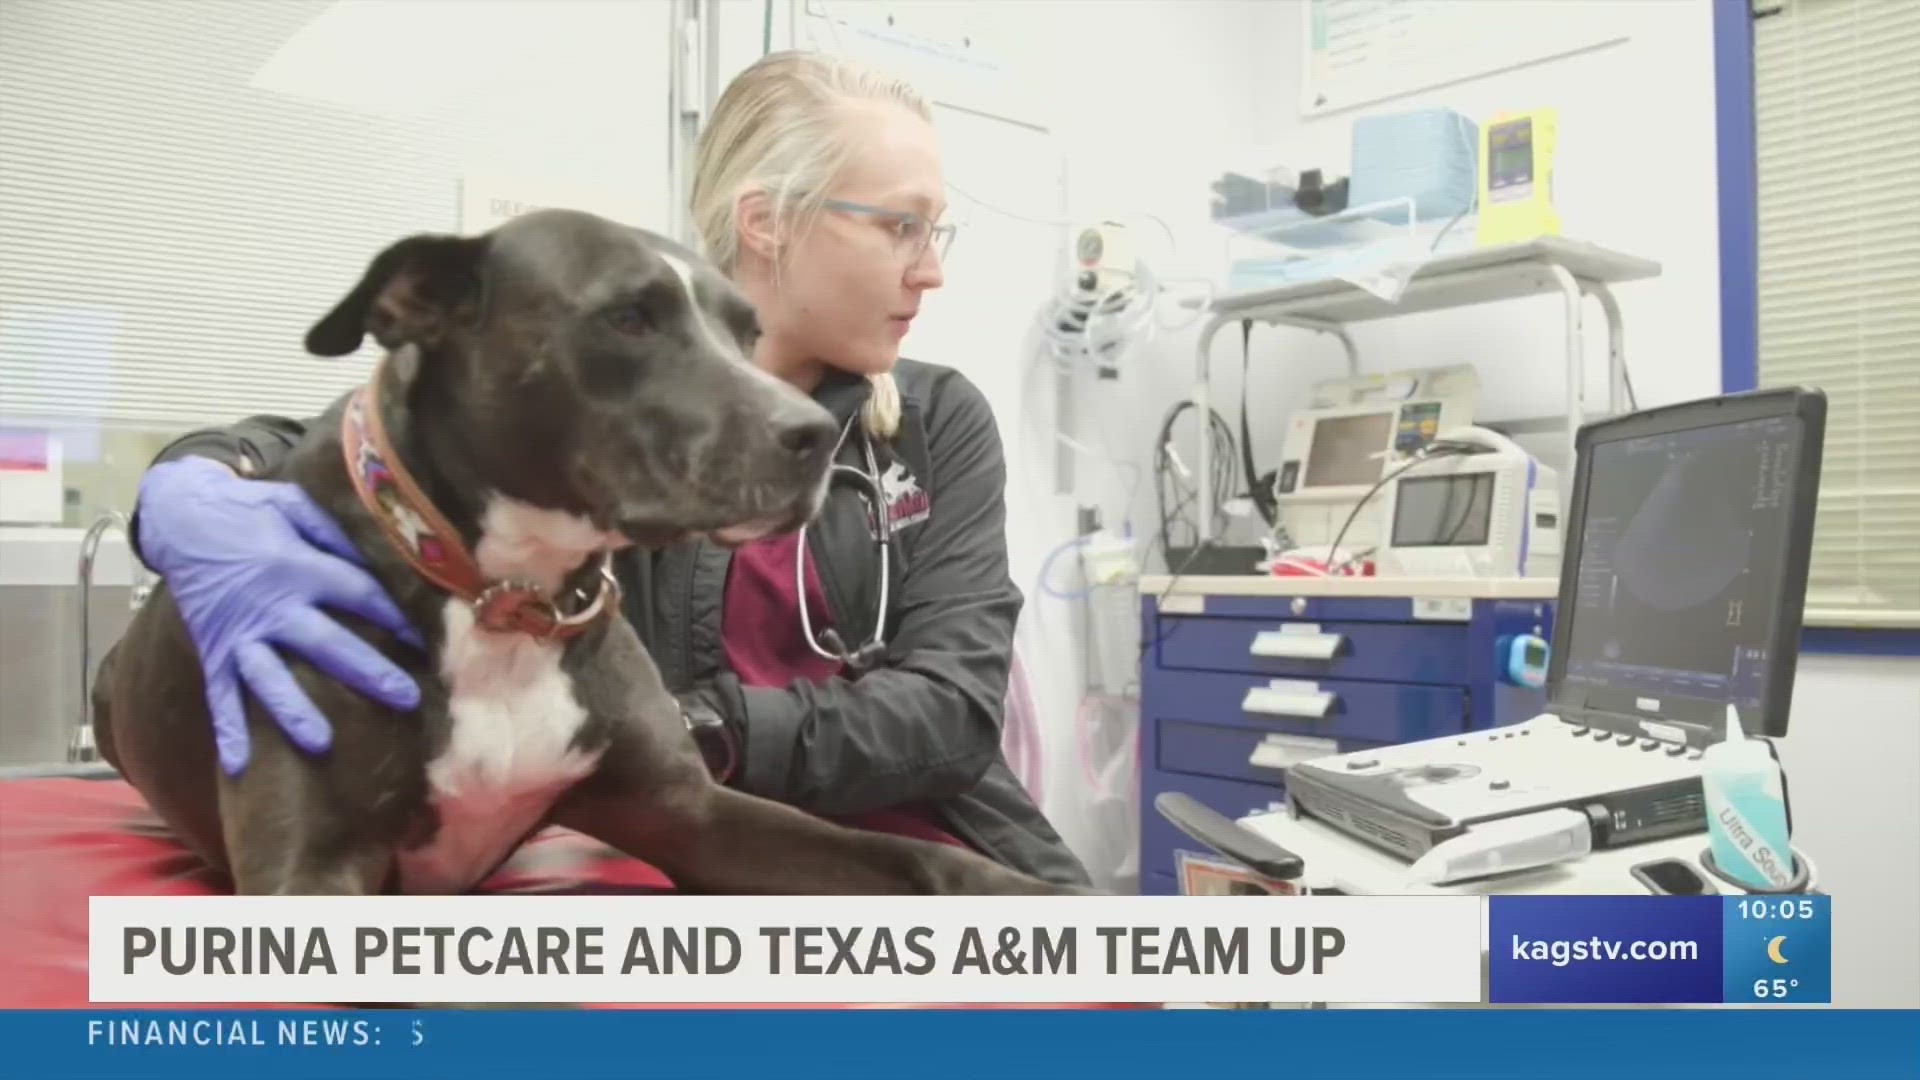 Texas A&M University and Purina Petcare are teaming up to improve microbiome pet health, all thanks to a $2 million research fund.